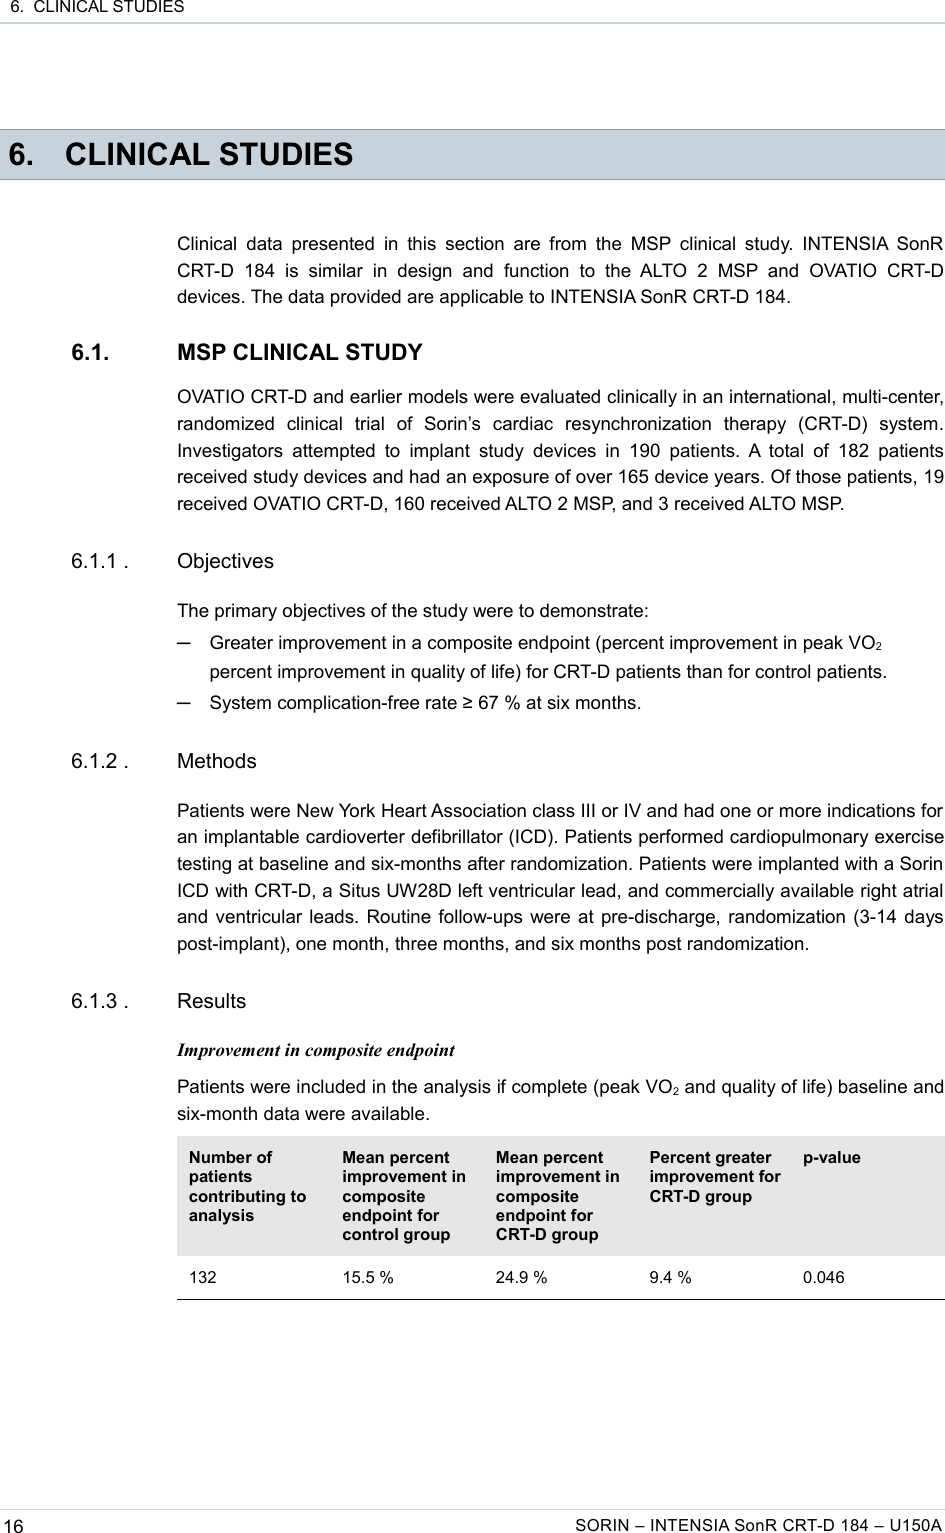  6.  CLINICAL STUDIES 6. CLINICAL STUDIESClinical data presented in this section are  from the MSP clinical study.  INTENSIA SonR CRT-D   184  is  similar   in   design  and   function   to  the  ALTO  2   MSP  and   OVATIO  CRT-D devices. The data provided are applicable to INTENSIA SonR CRT-D 184.6.1. MSP CLINICAL STUDYOVATIO CRT-D and earlier models were evaluated clinically in an international, multi-center, randomized   clinical   trial   of   Sorin’s   cardiac   resynchronization   therapy   (CRT-D)   system. Investigators  attempted  to implant   study  devices  in  190 patients.  A  total  of 182  patients received study devices and had an exposure of over 165 device years. Of those patients, 19 received OVATIO CRT-D, 160 received ALTO 2 MSP, and 3 received ALTO MSP.6.1.1 . ObjectivesThe primary objectives of the study were to demonstrate:─Greater improvement in a composite endpoint (percent improvement in peak VO2 percent improvement in quality of life) for CRT-D patients than for control patients.─System complication-free rate ≥ 67 % at six months.6.1.2 . MethodsPatients were New York Heart Association class III or IV and had one or more indications for an implantable cardioverter defibrillator (ICD). Patients performed cardiopulmonary exercise testing at baseline and six-months after randomization. Patients were implanted with a Sorin ICD with CRT-D, a Situs UW28D left ventricular lead, and commercially available right atrial and ventricular leads. Routine follow-ups were at pre-discharge, randomization (3-14 days post-implant), one month, three months, and six months post randomization.6.1.3 . ResultsImprovement in composite endpointPatients were included in the analysis if complete (peak VO2 and quality of life) baseline and six-month data were available.Number of patients contributing to analysisMean percent improvement in composite endpoint for control groupMean percent improvement in composite endpoint for CRT-D groupPercent greater improvement for CRT-D groupp-value132 15.5 % 24.9 % 9.4 % 0.04616 SORIN – INTENSIA SonR CRT-D 184 – U150A